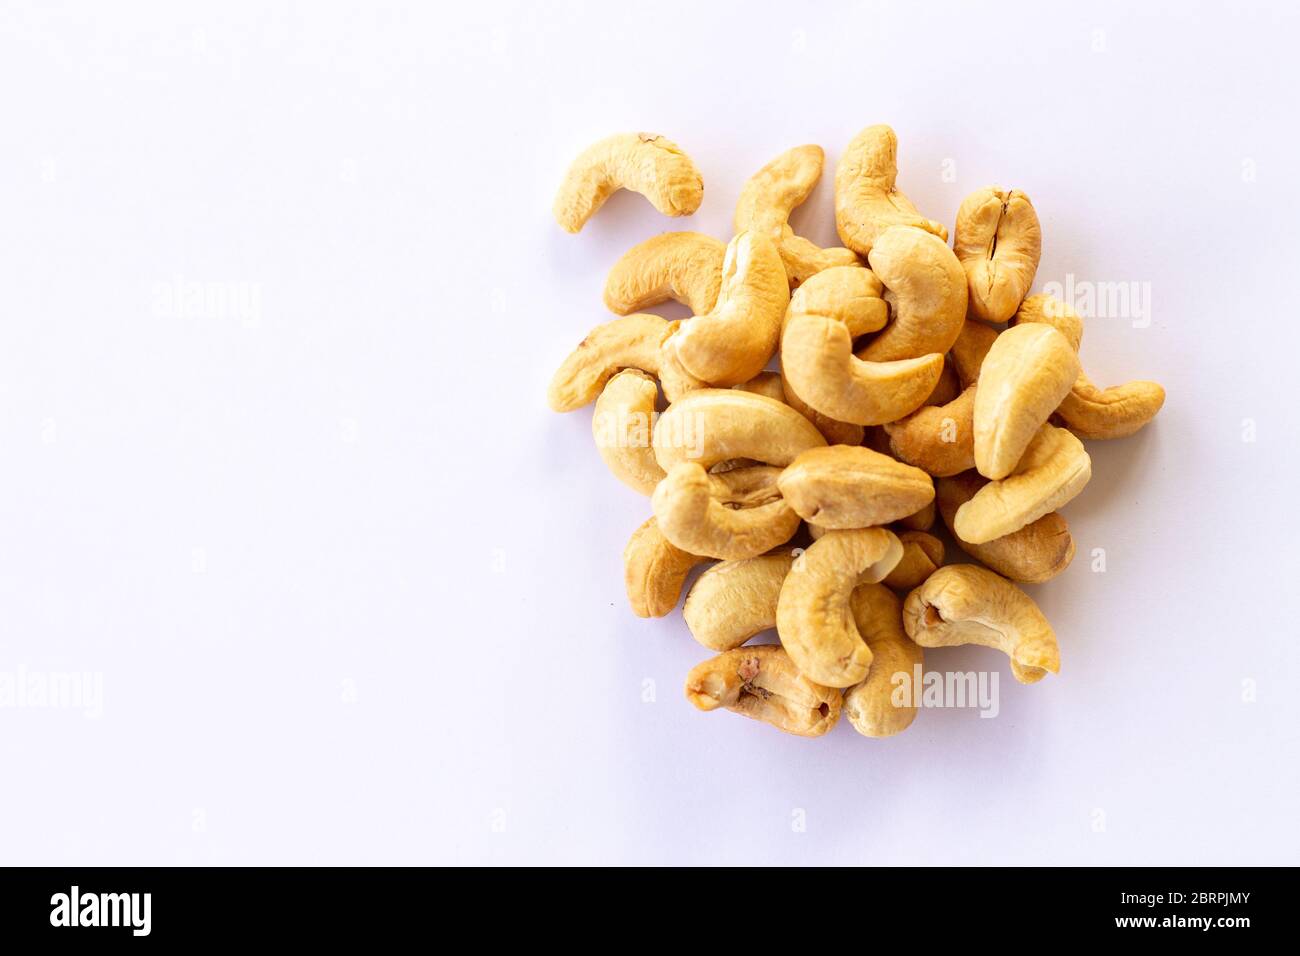 Many Roasted salted cashew nuts  isolated on a white background Stock Photo